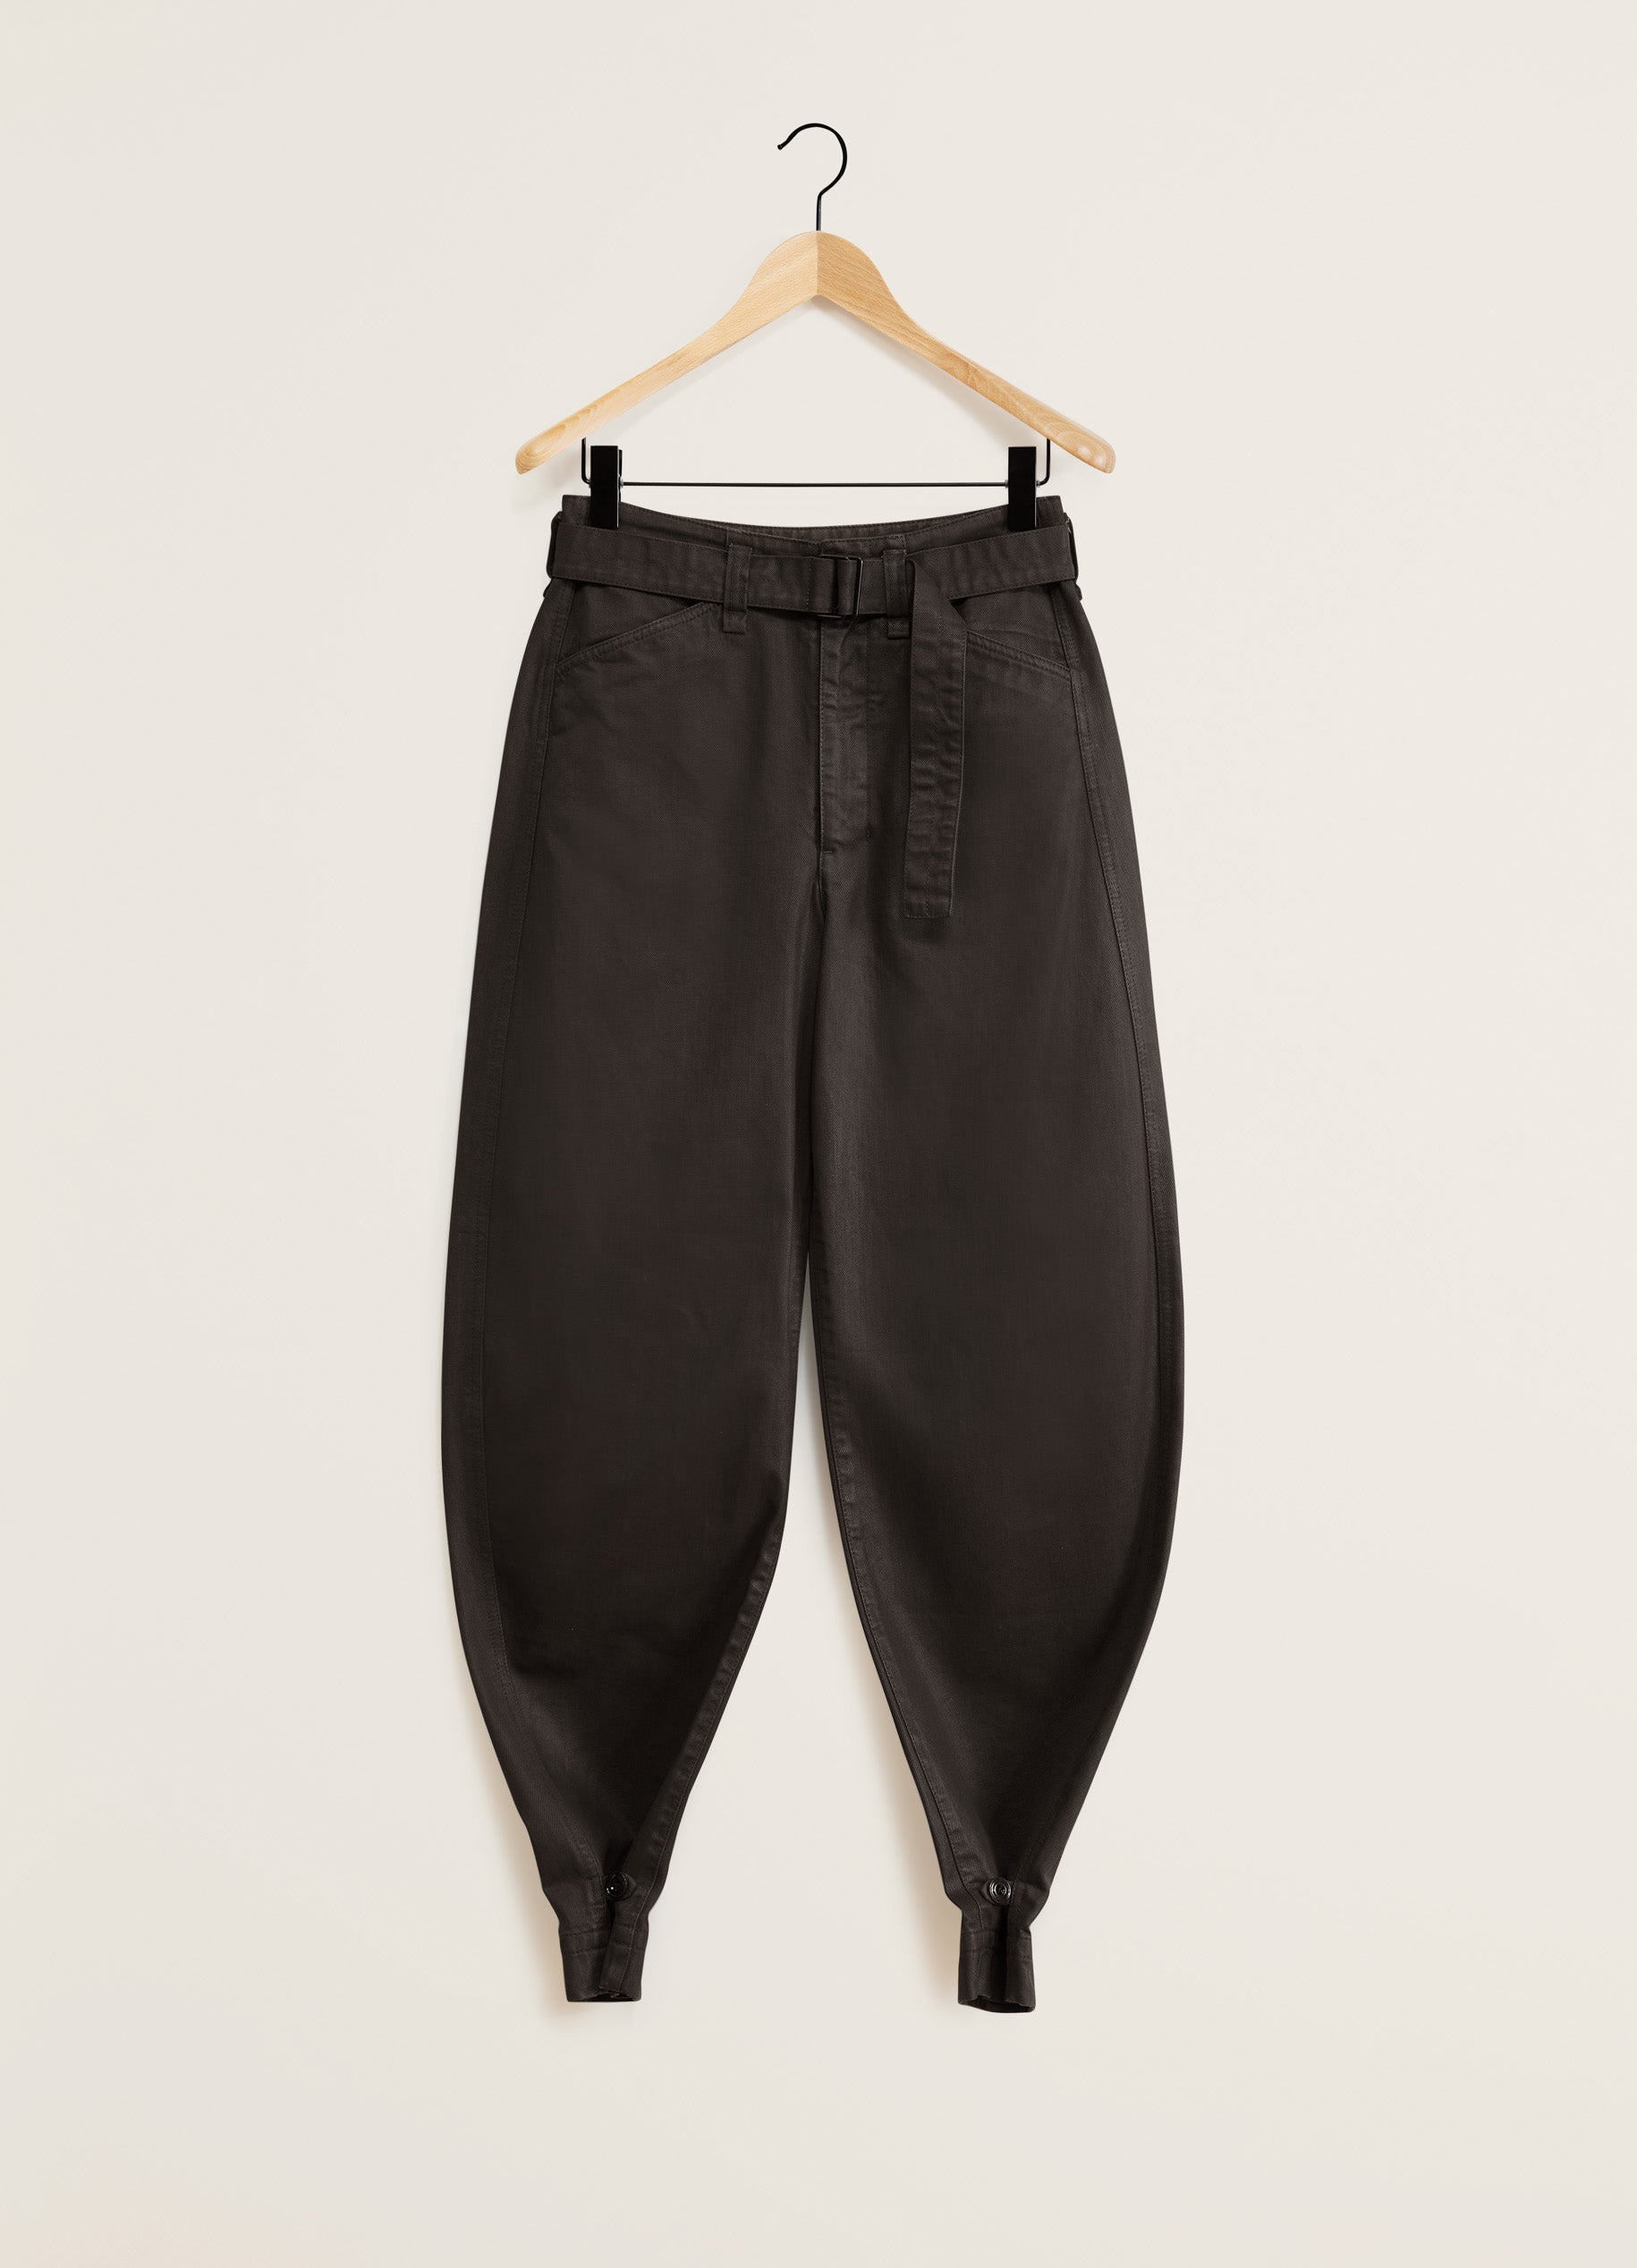 Belted Tapered Pants in Khaki Brown | LEMAIRE